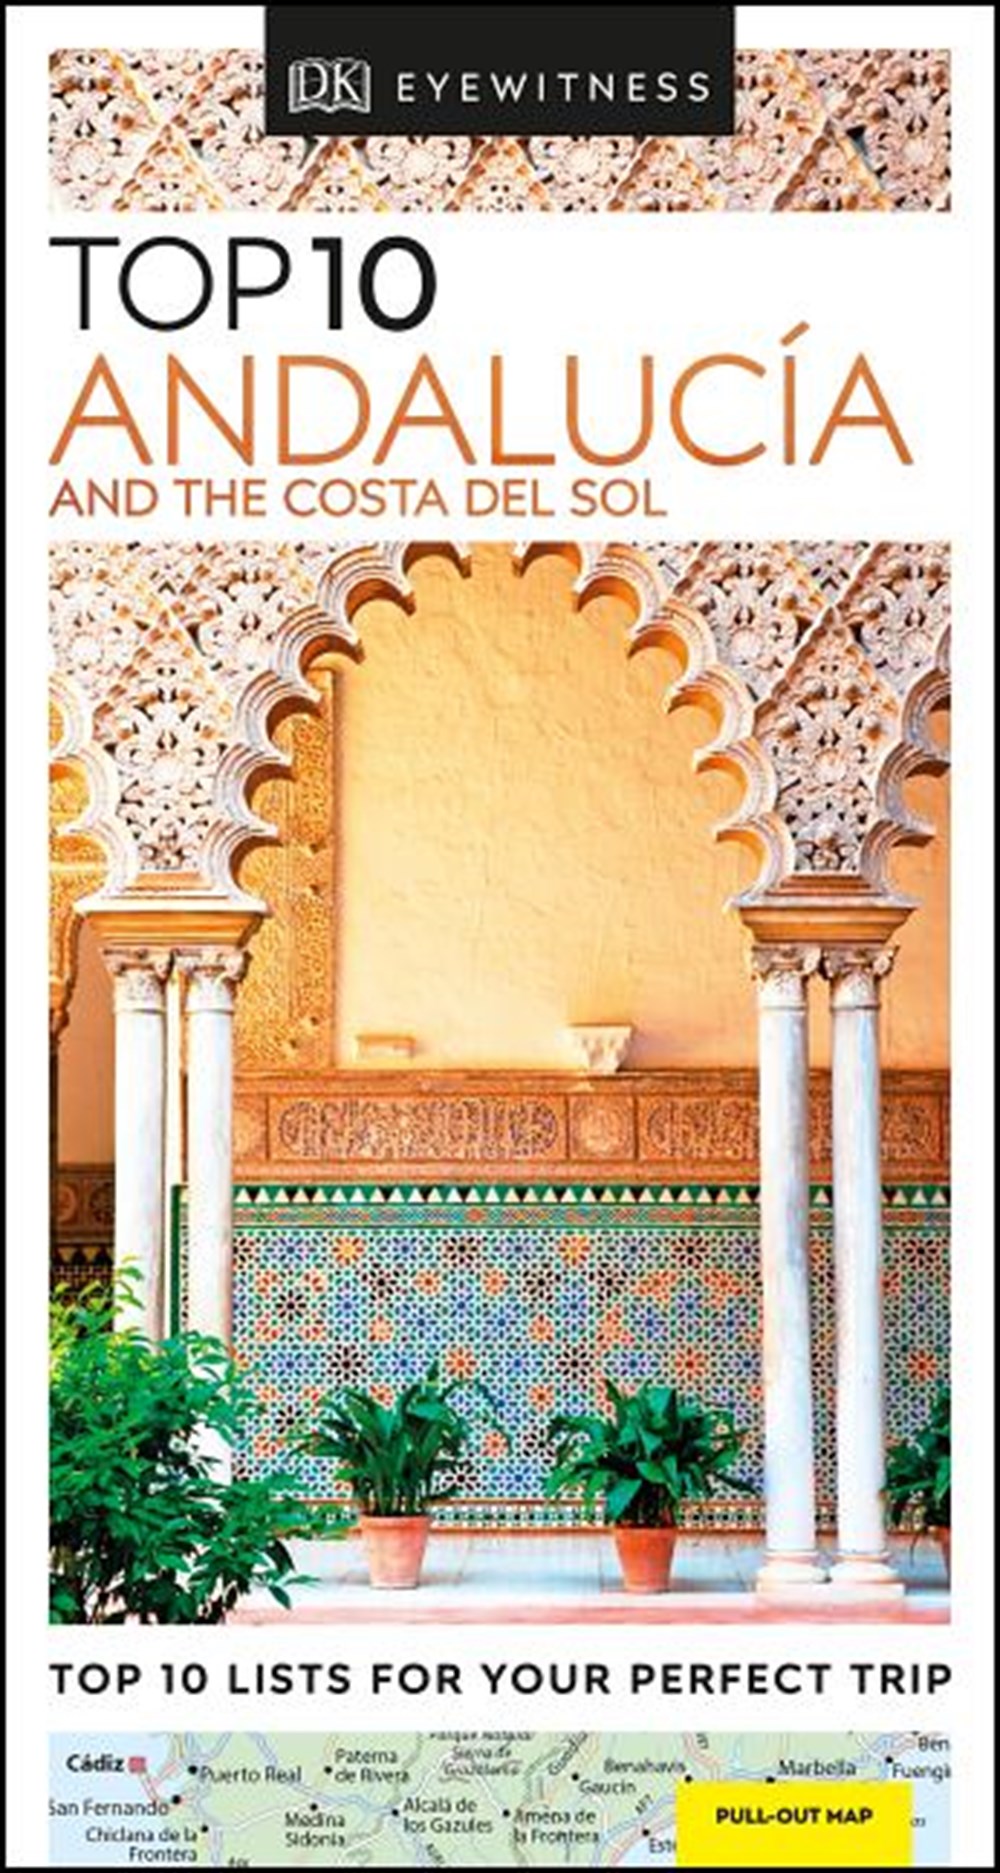 Top 10 Andaluc�a and the Costa del Sol